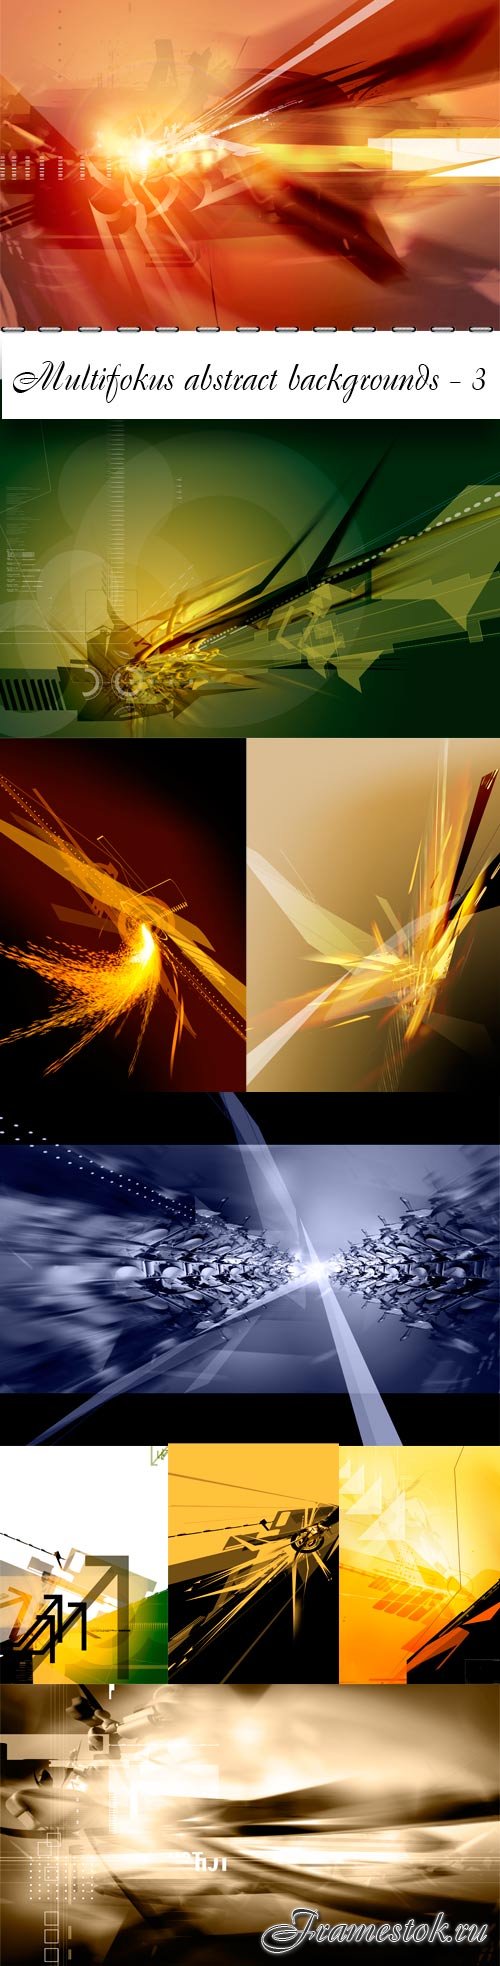 Multifokus abstract backgrounds PSD - 3